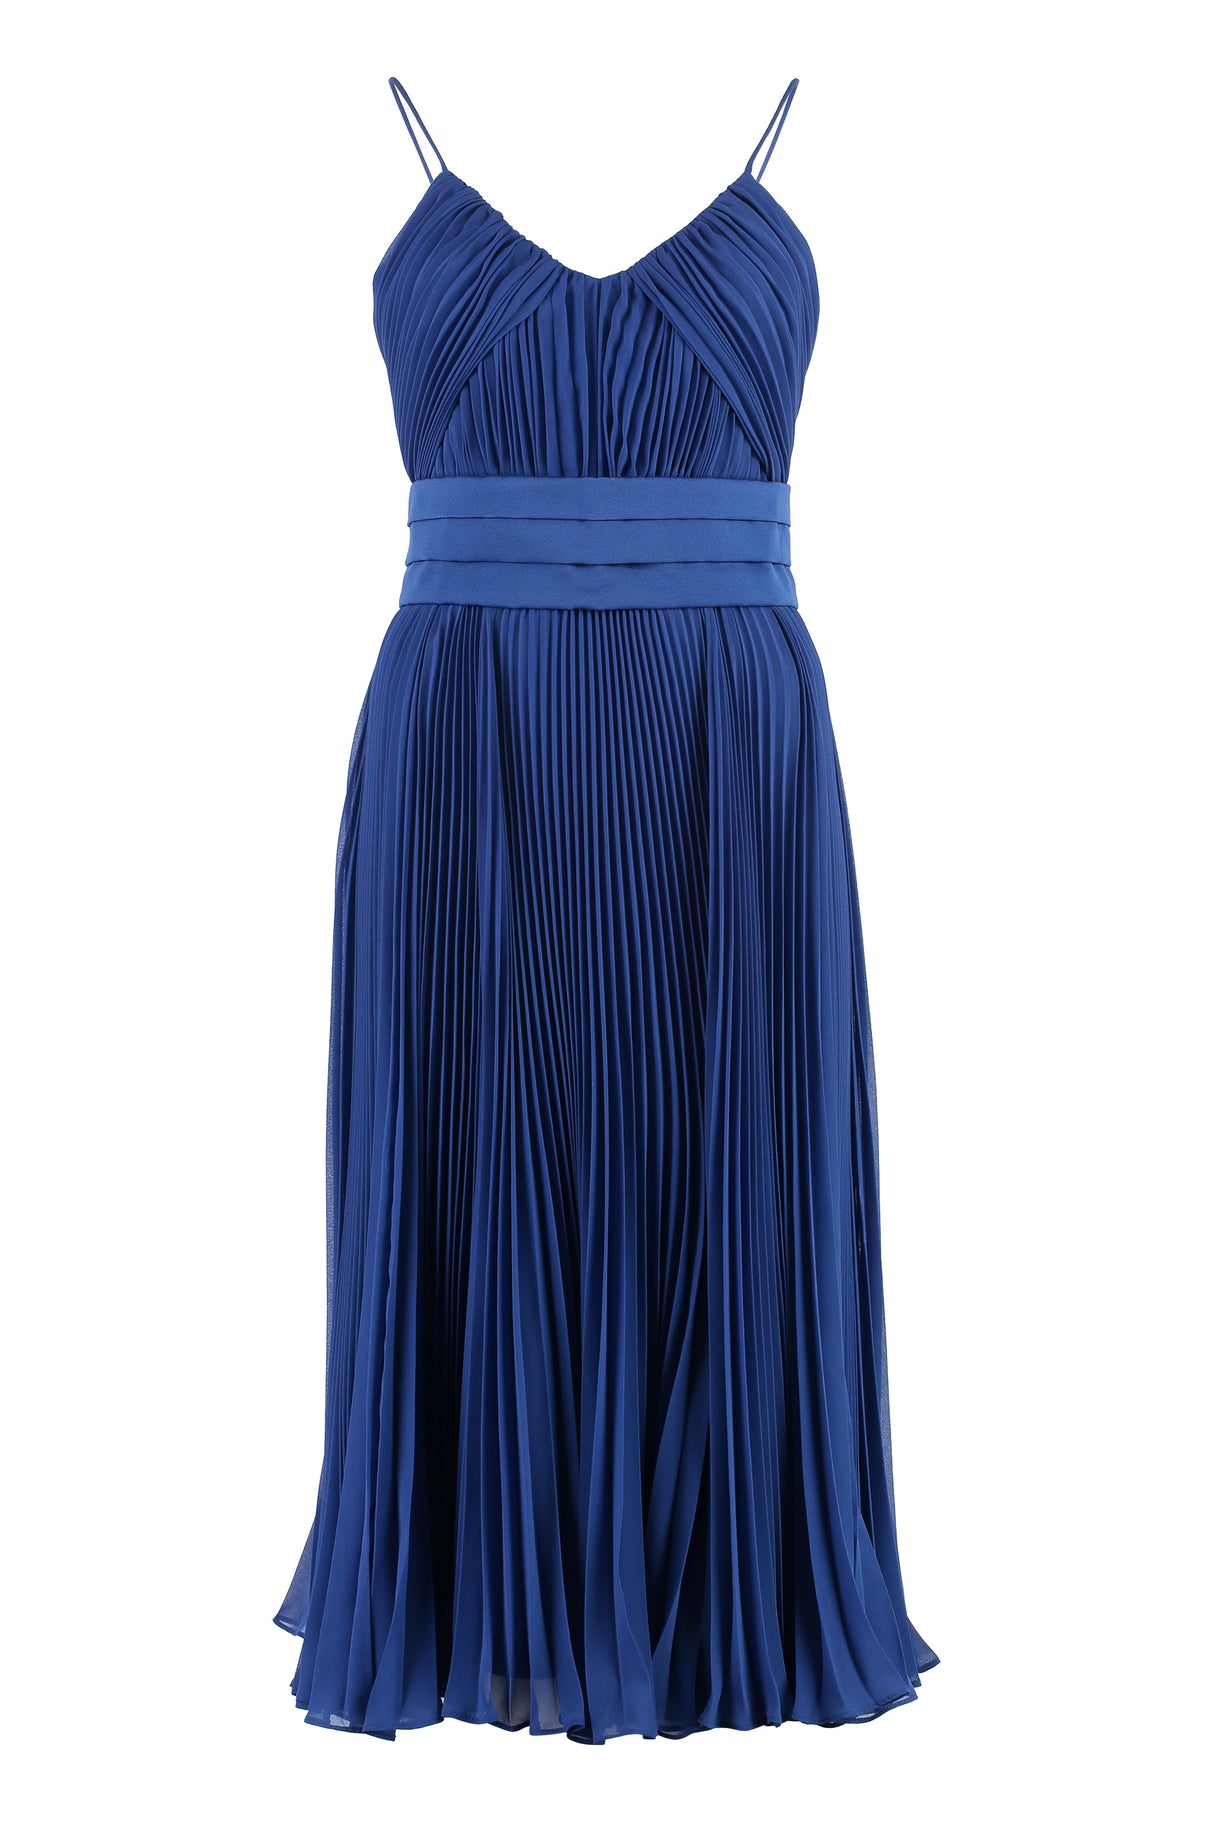 MAX MARA Blue Cross Back Pleated Midi Dress for Women - SS23 Collection